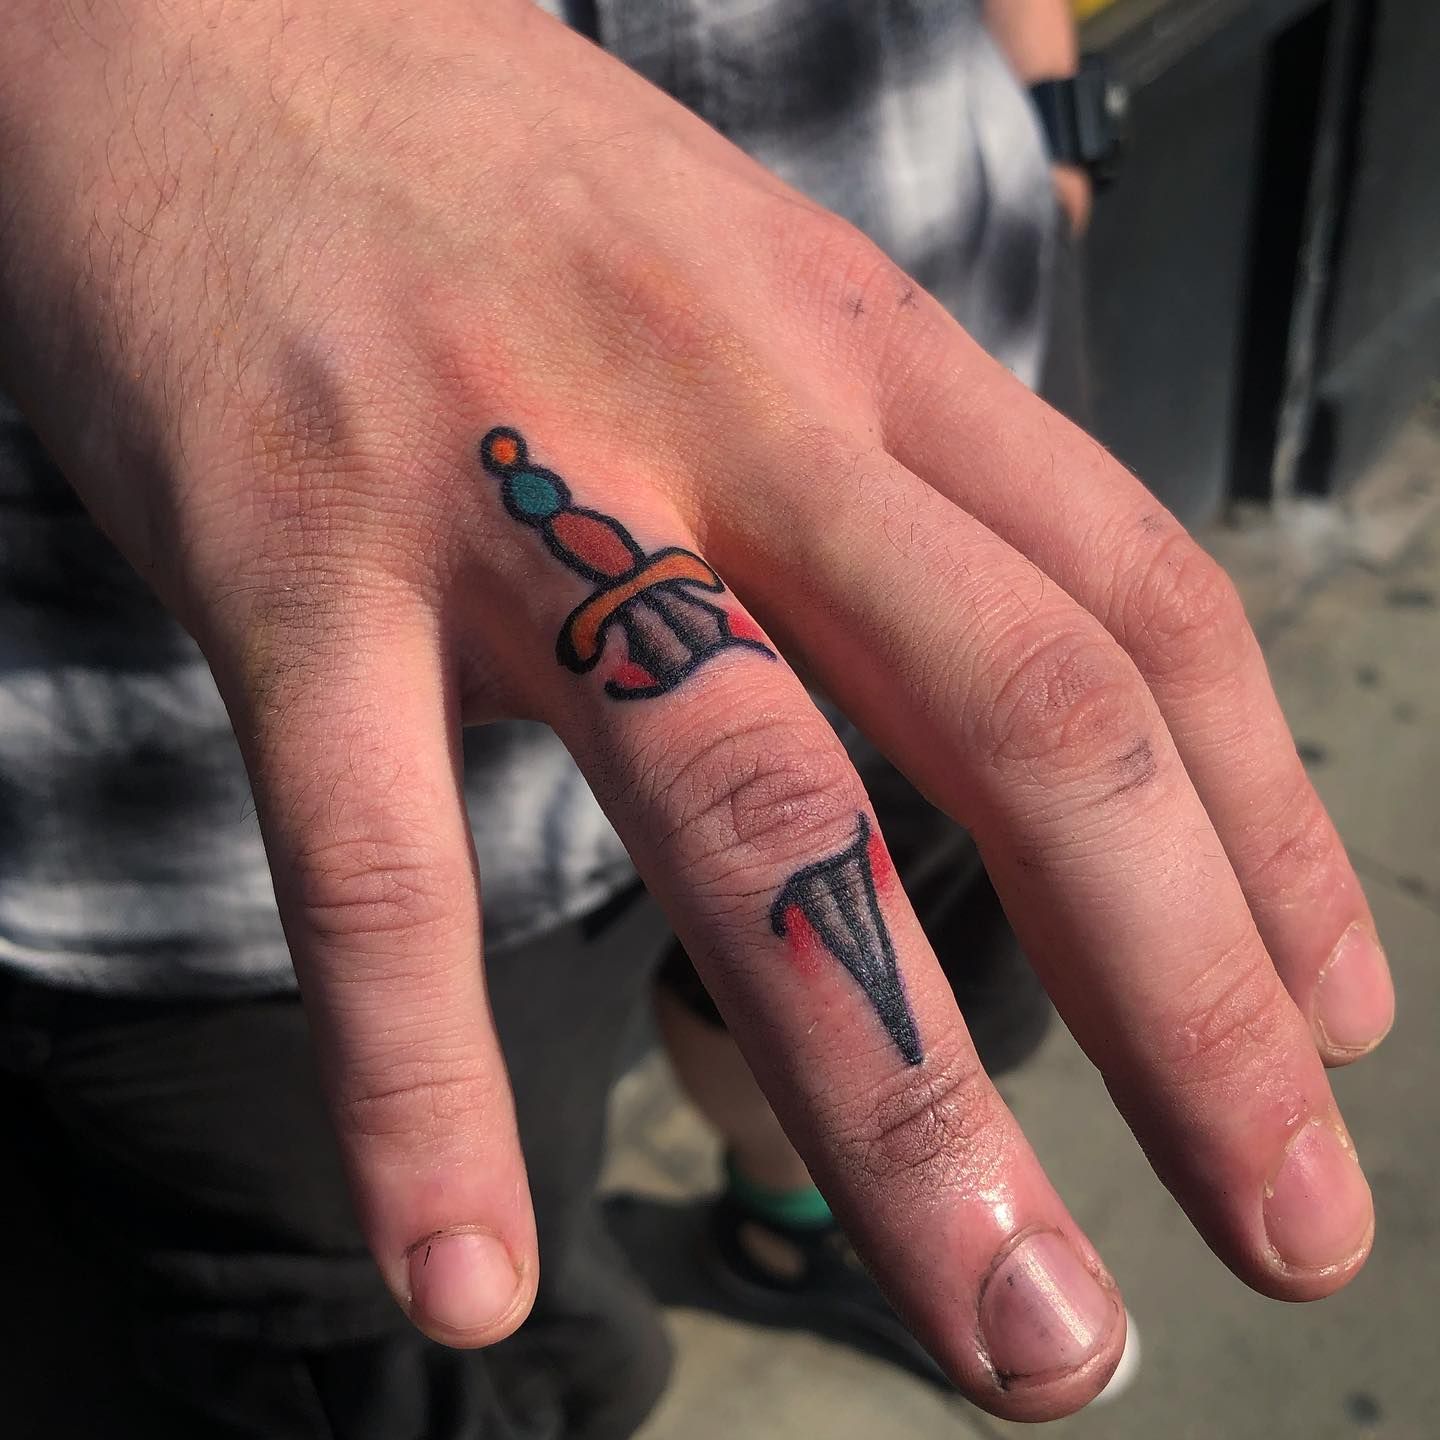 What are the pros and cons of getting an index finger tattoo? - Quora